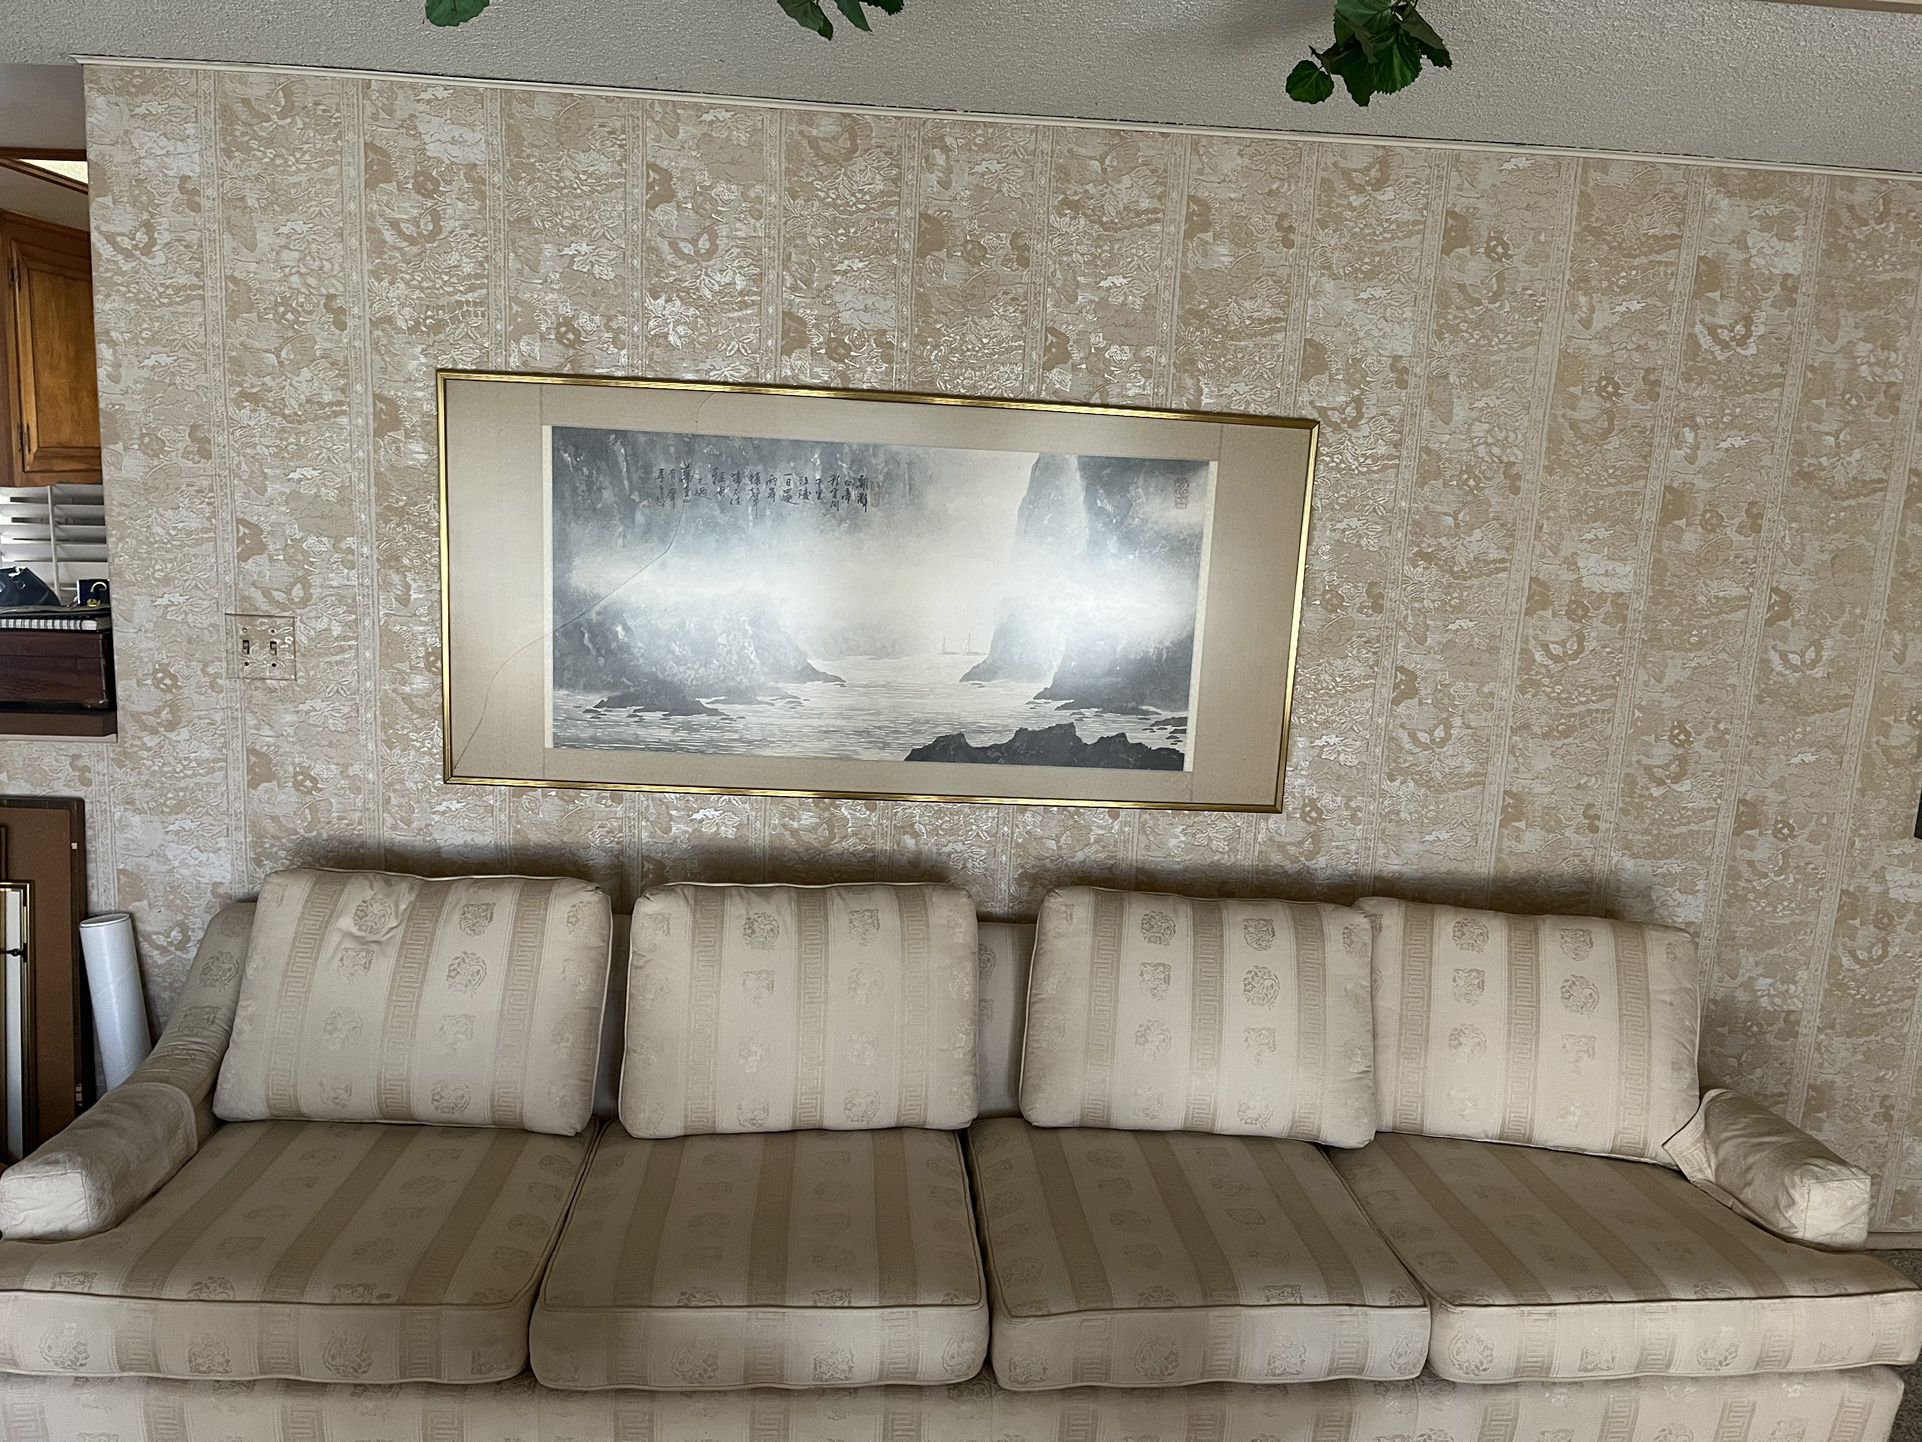 4 CUSHION COUCH (must sale 28/29 of April 